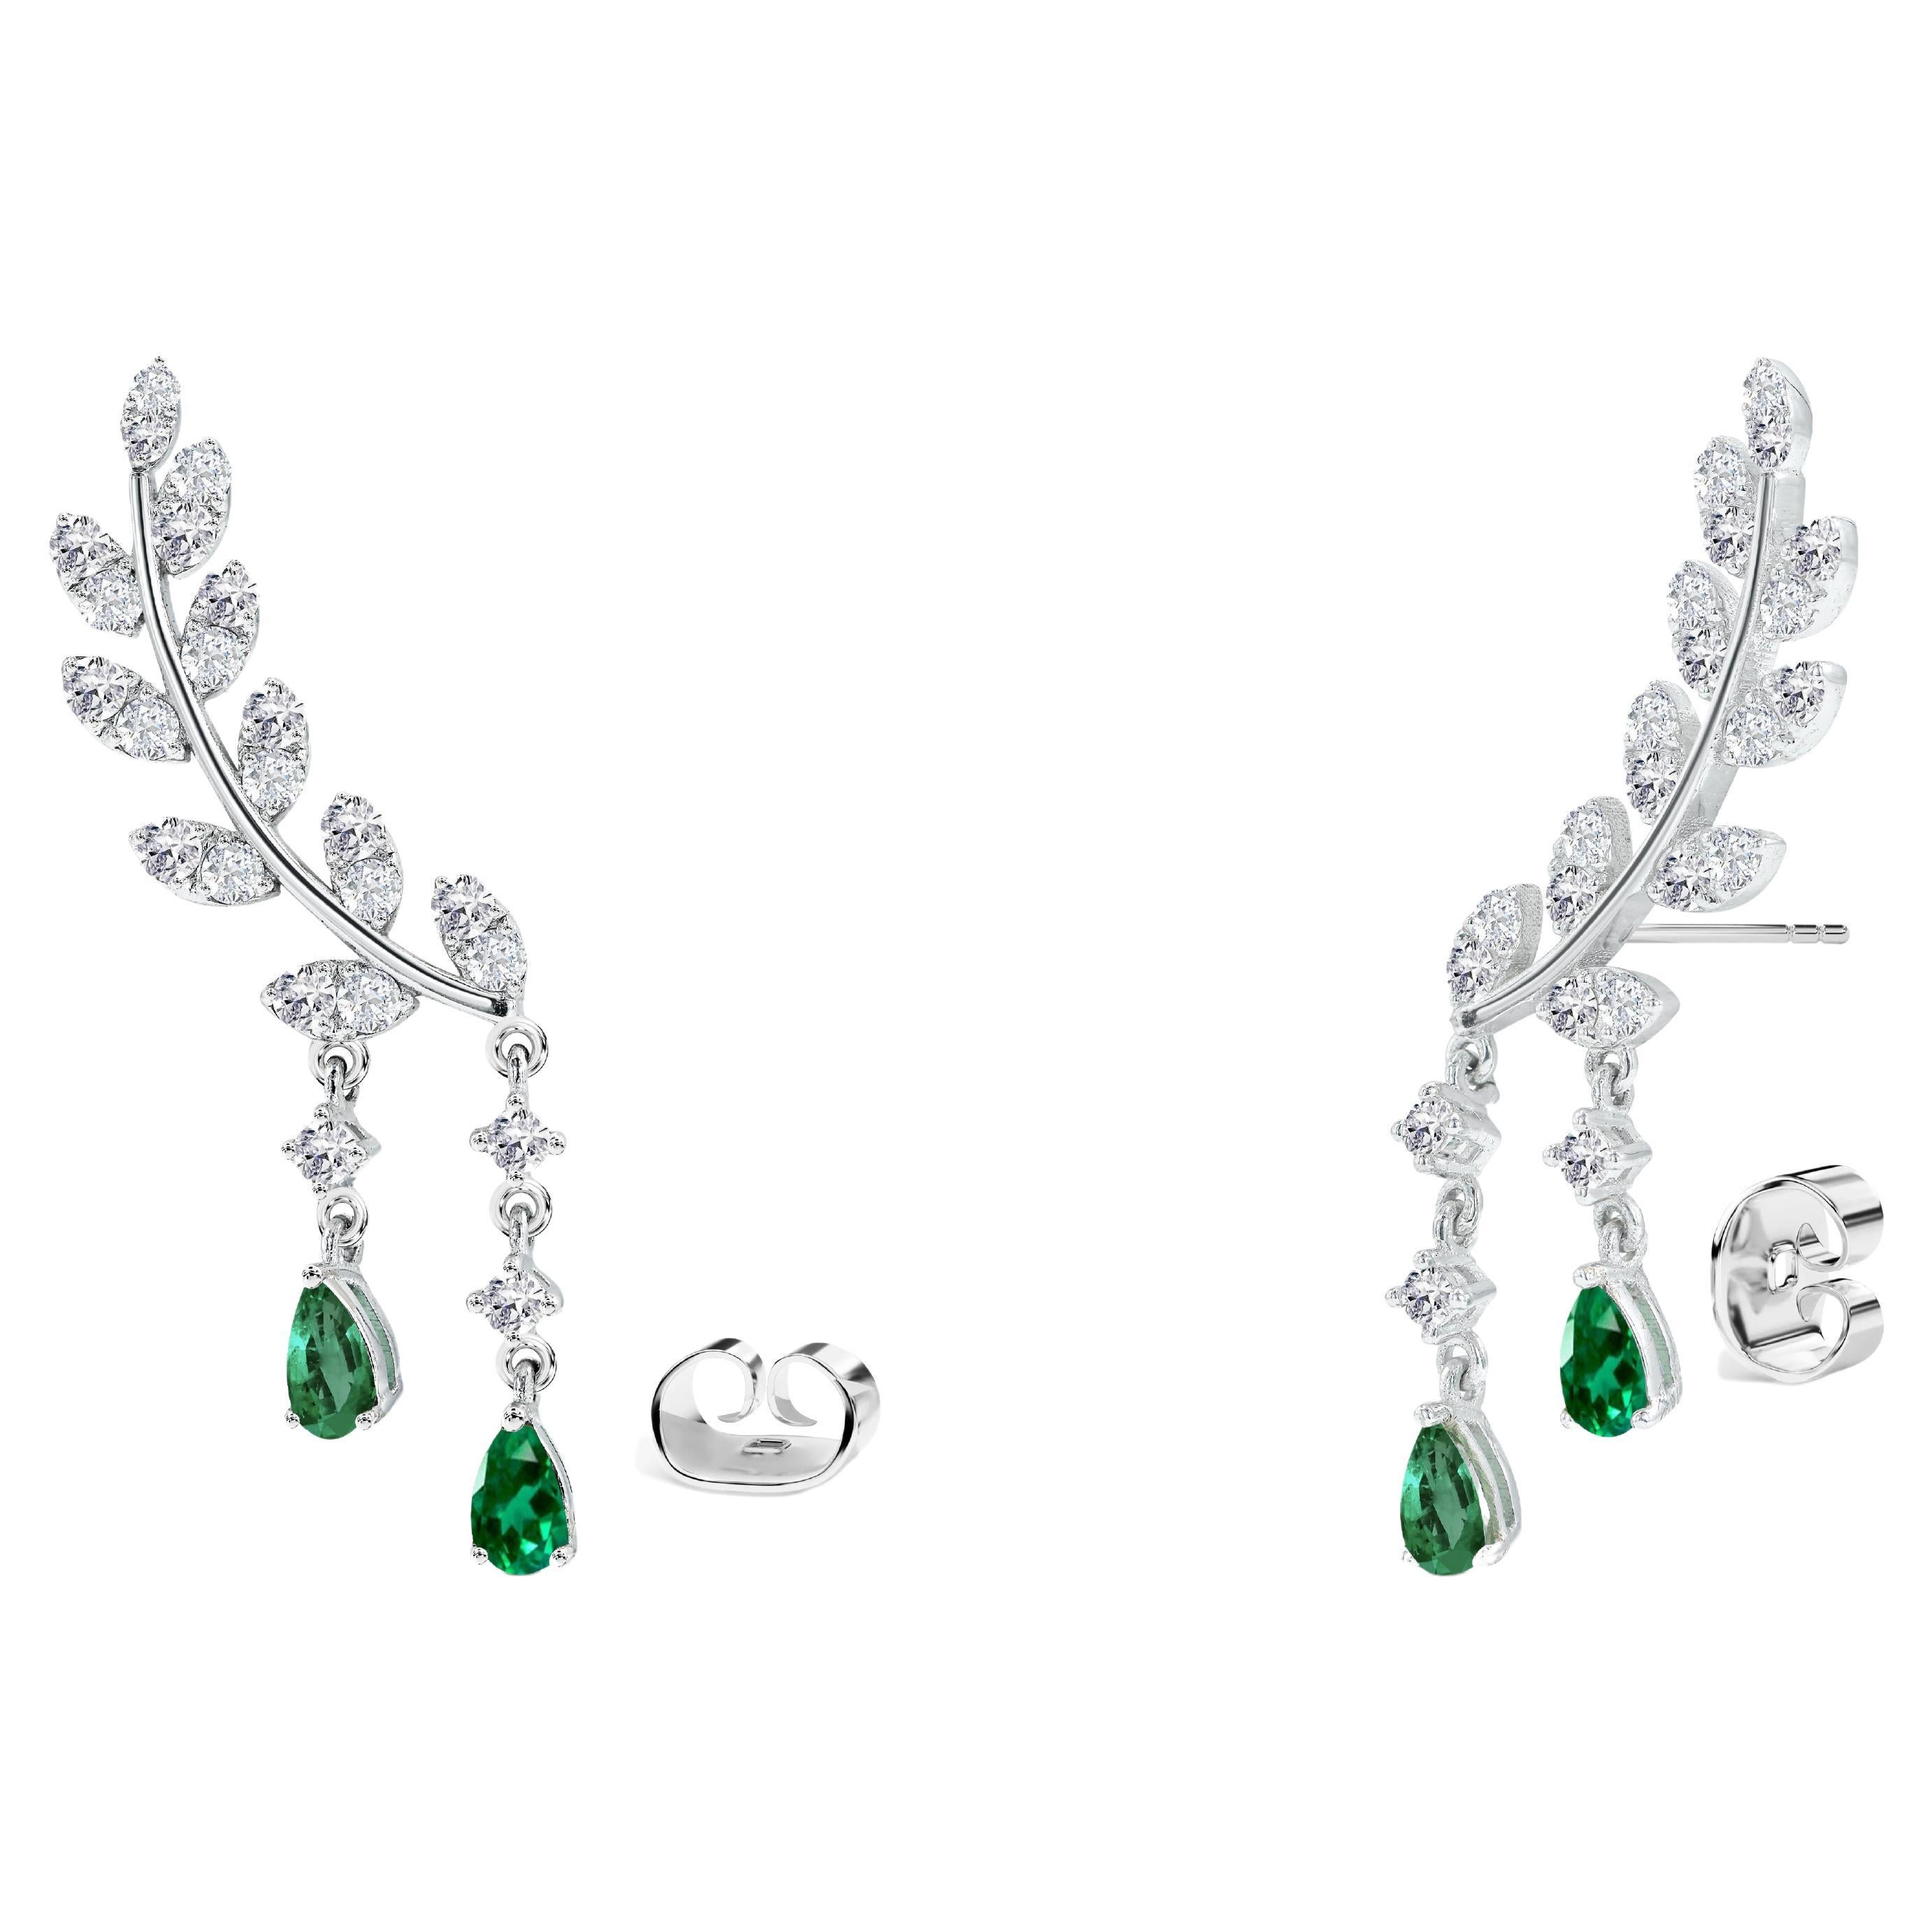 2.25ct Diamond And Emerald Leaf Drop Earrings In 14k Gold Round Cut Diamond For Sale